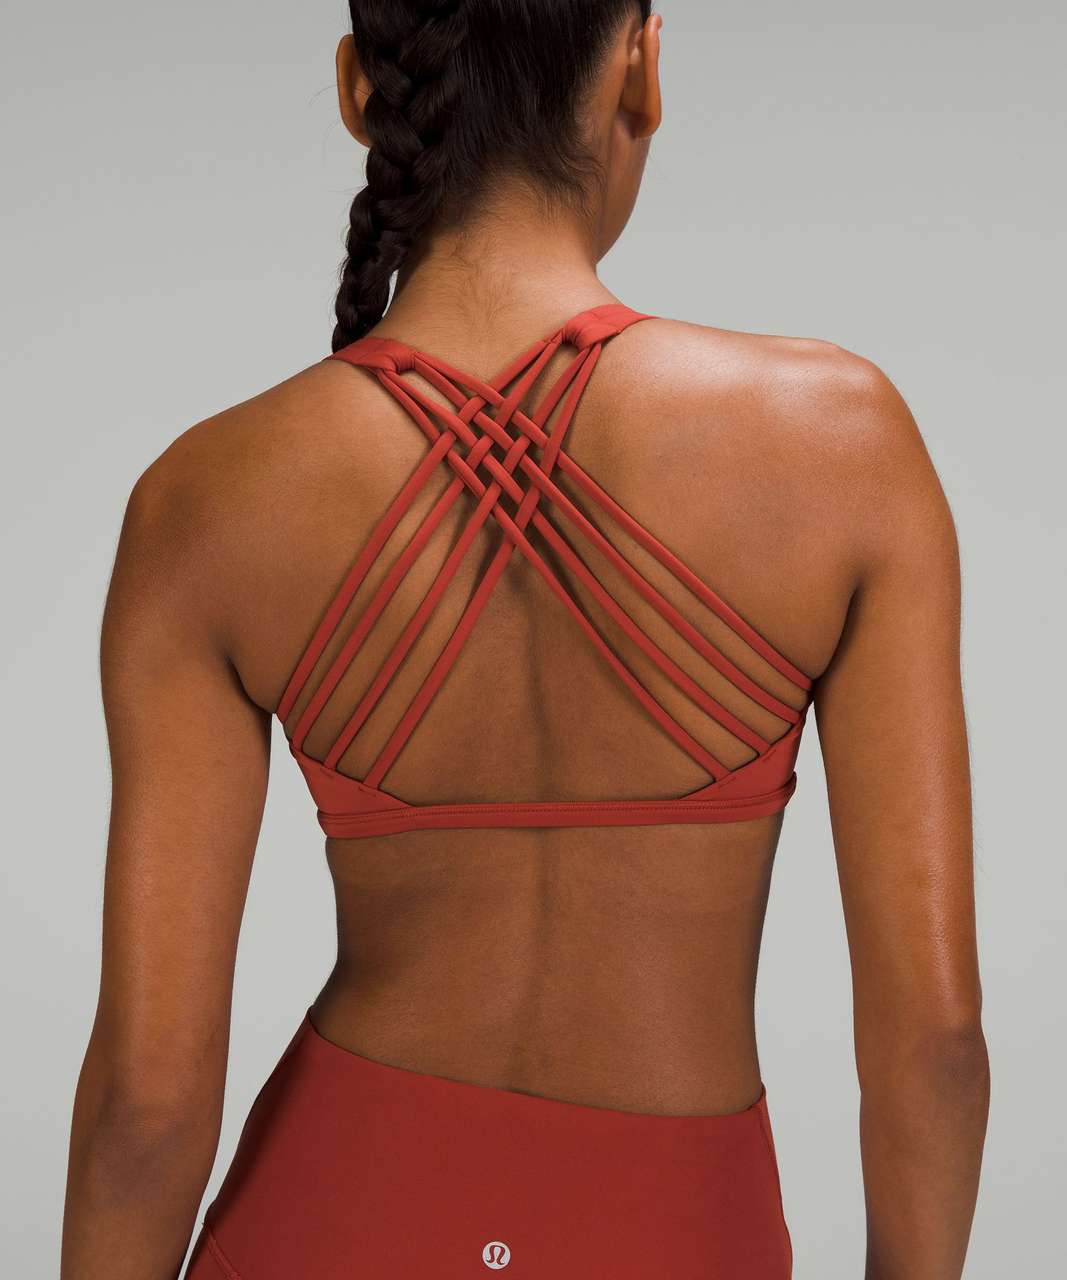 Lululemon Free to Be Bra - Wild *Light Support, A/B Cup - Cayenne